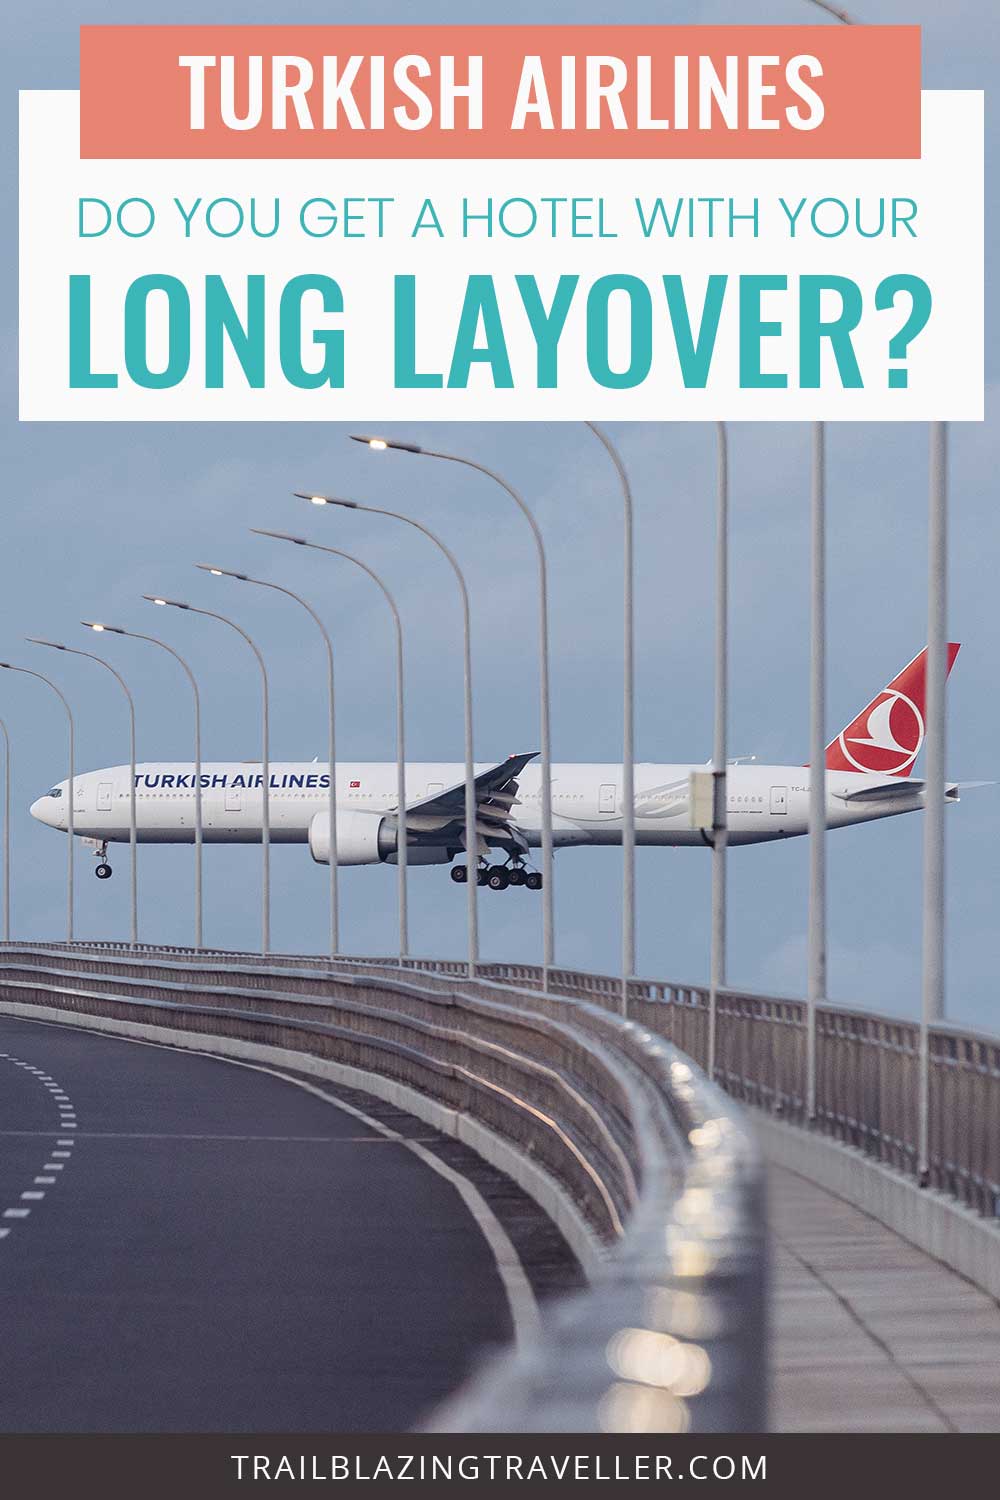 Turkish Airlines – Do You Get a Hotel with Your Long Layover?